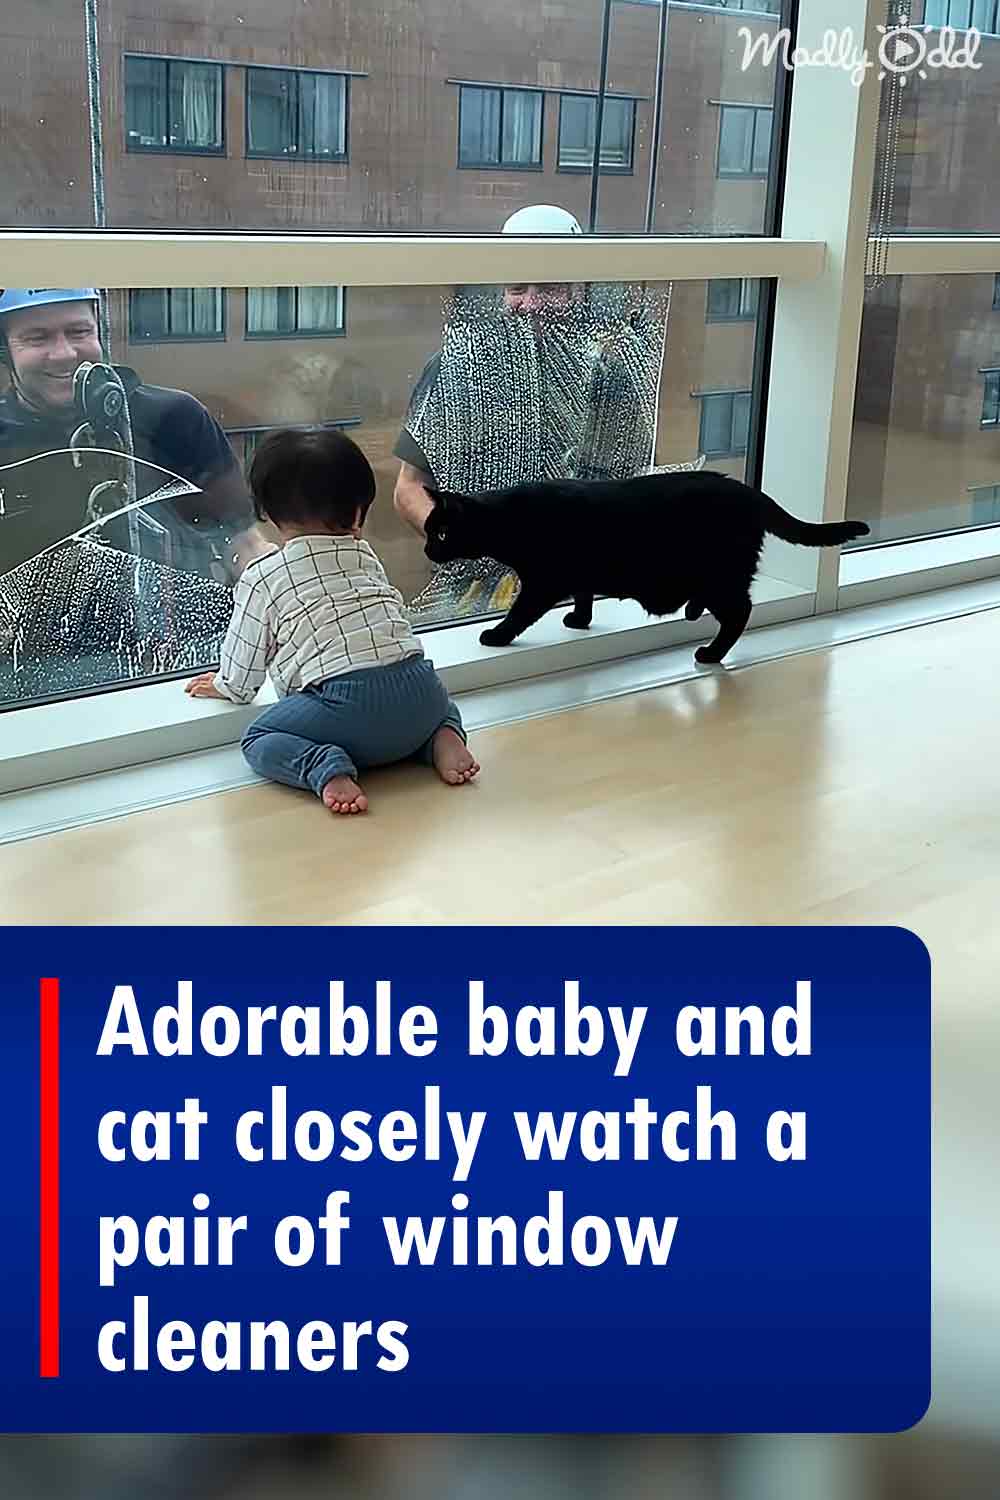 Adorable baby and cat closely watch a pair of window cleaners